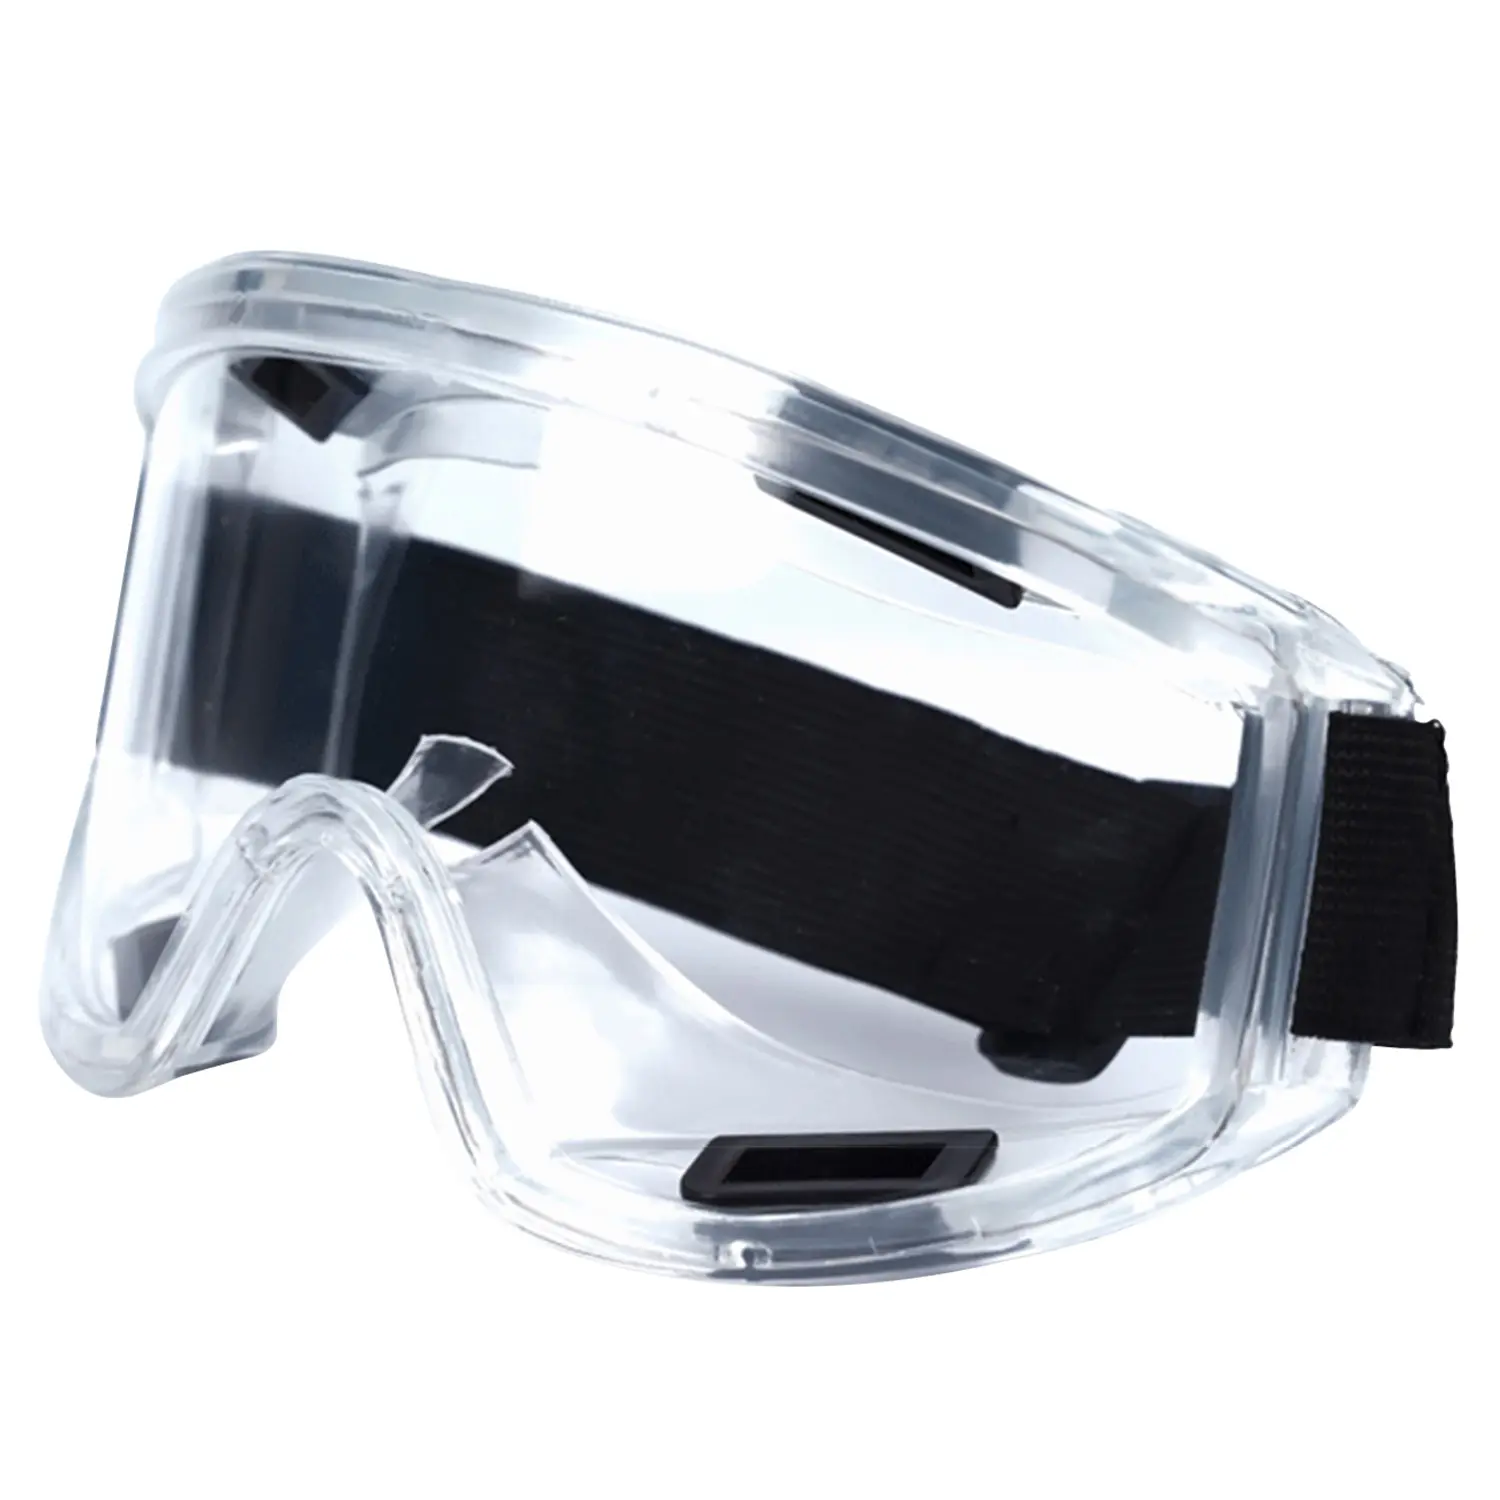 KSEIBI High Quality Polycarbonate Wide-Vision Safety Goggle For Eye Protection